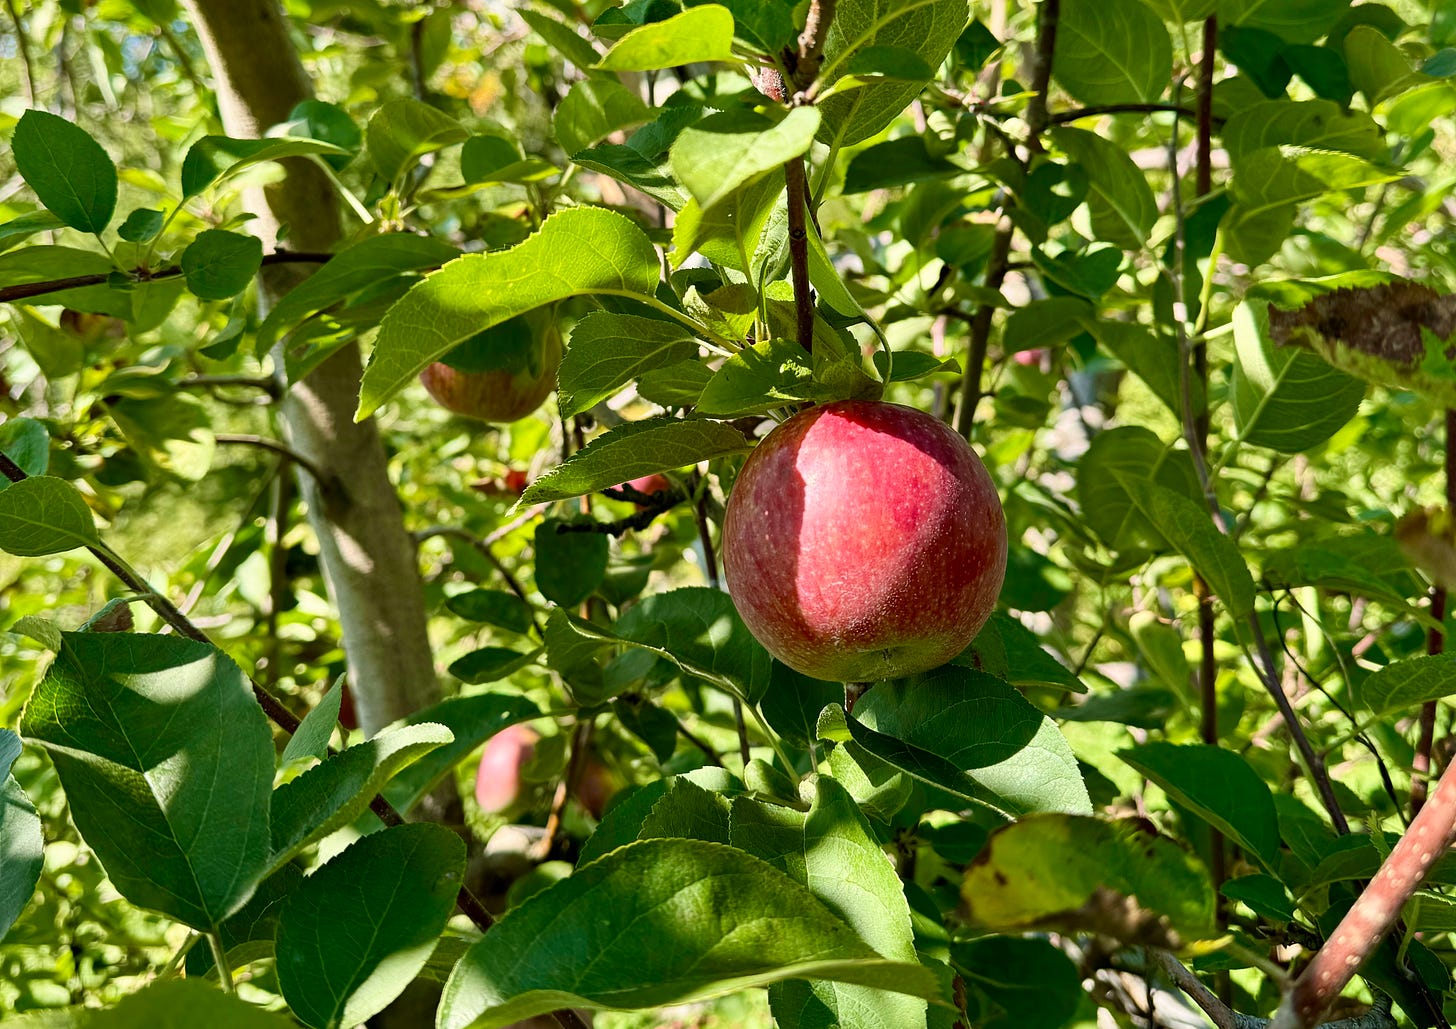 Red apple hanging off branch